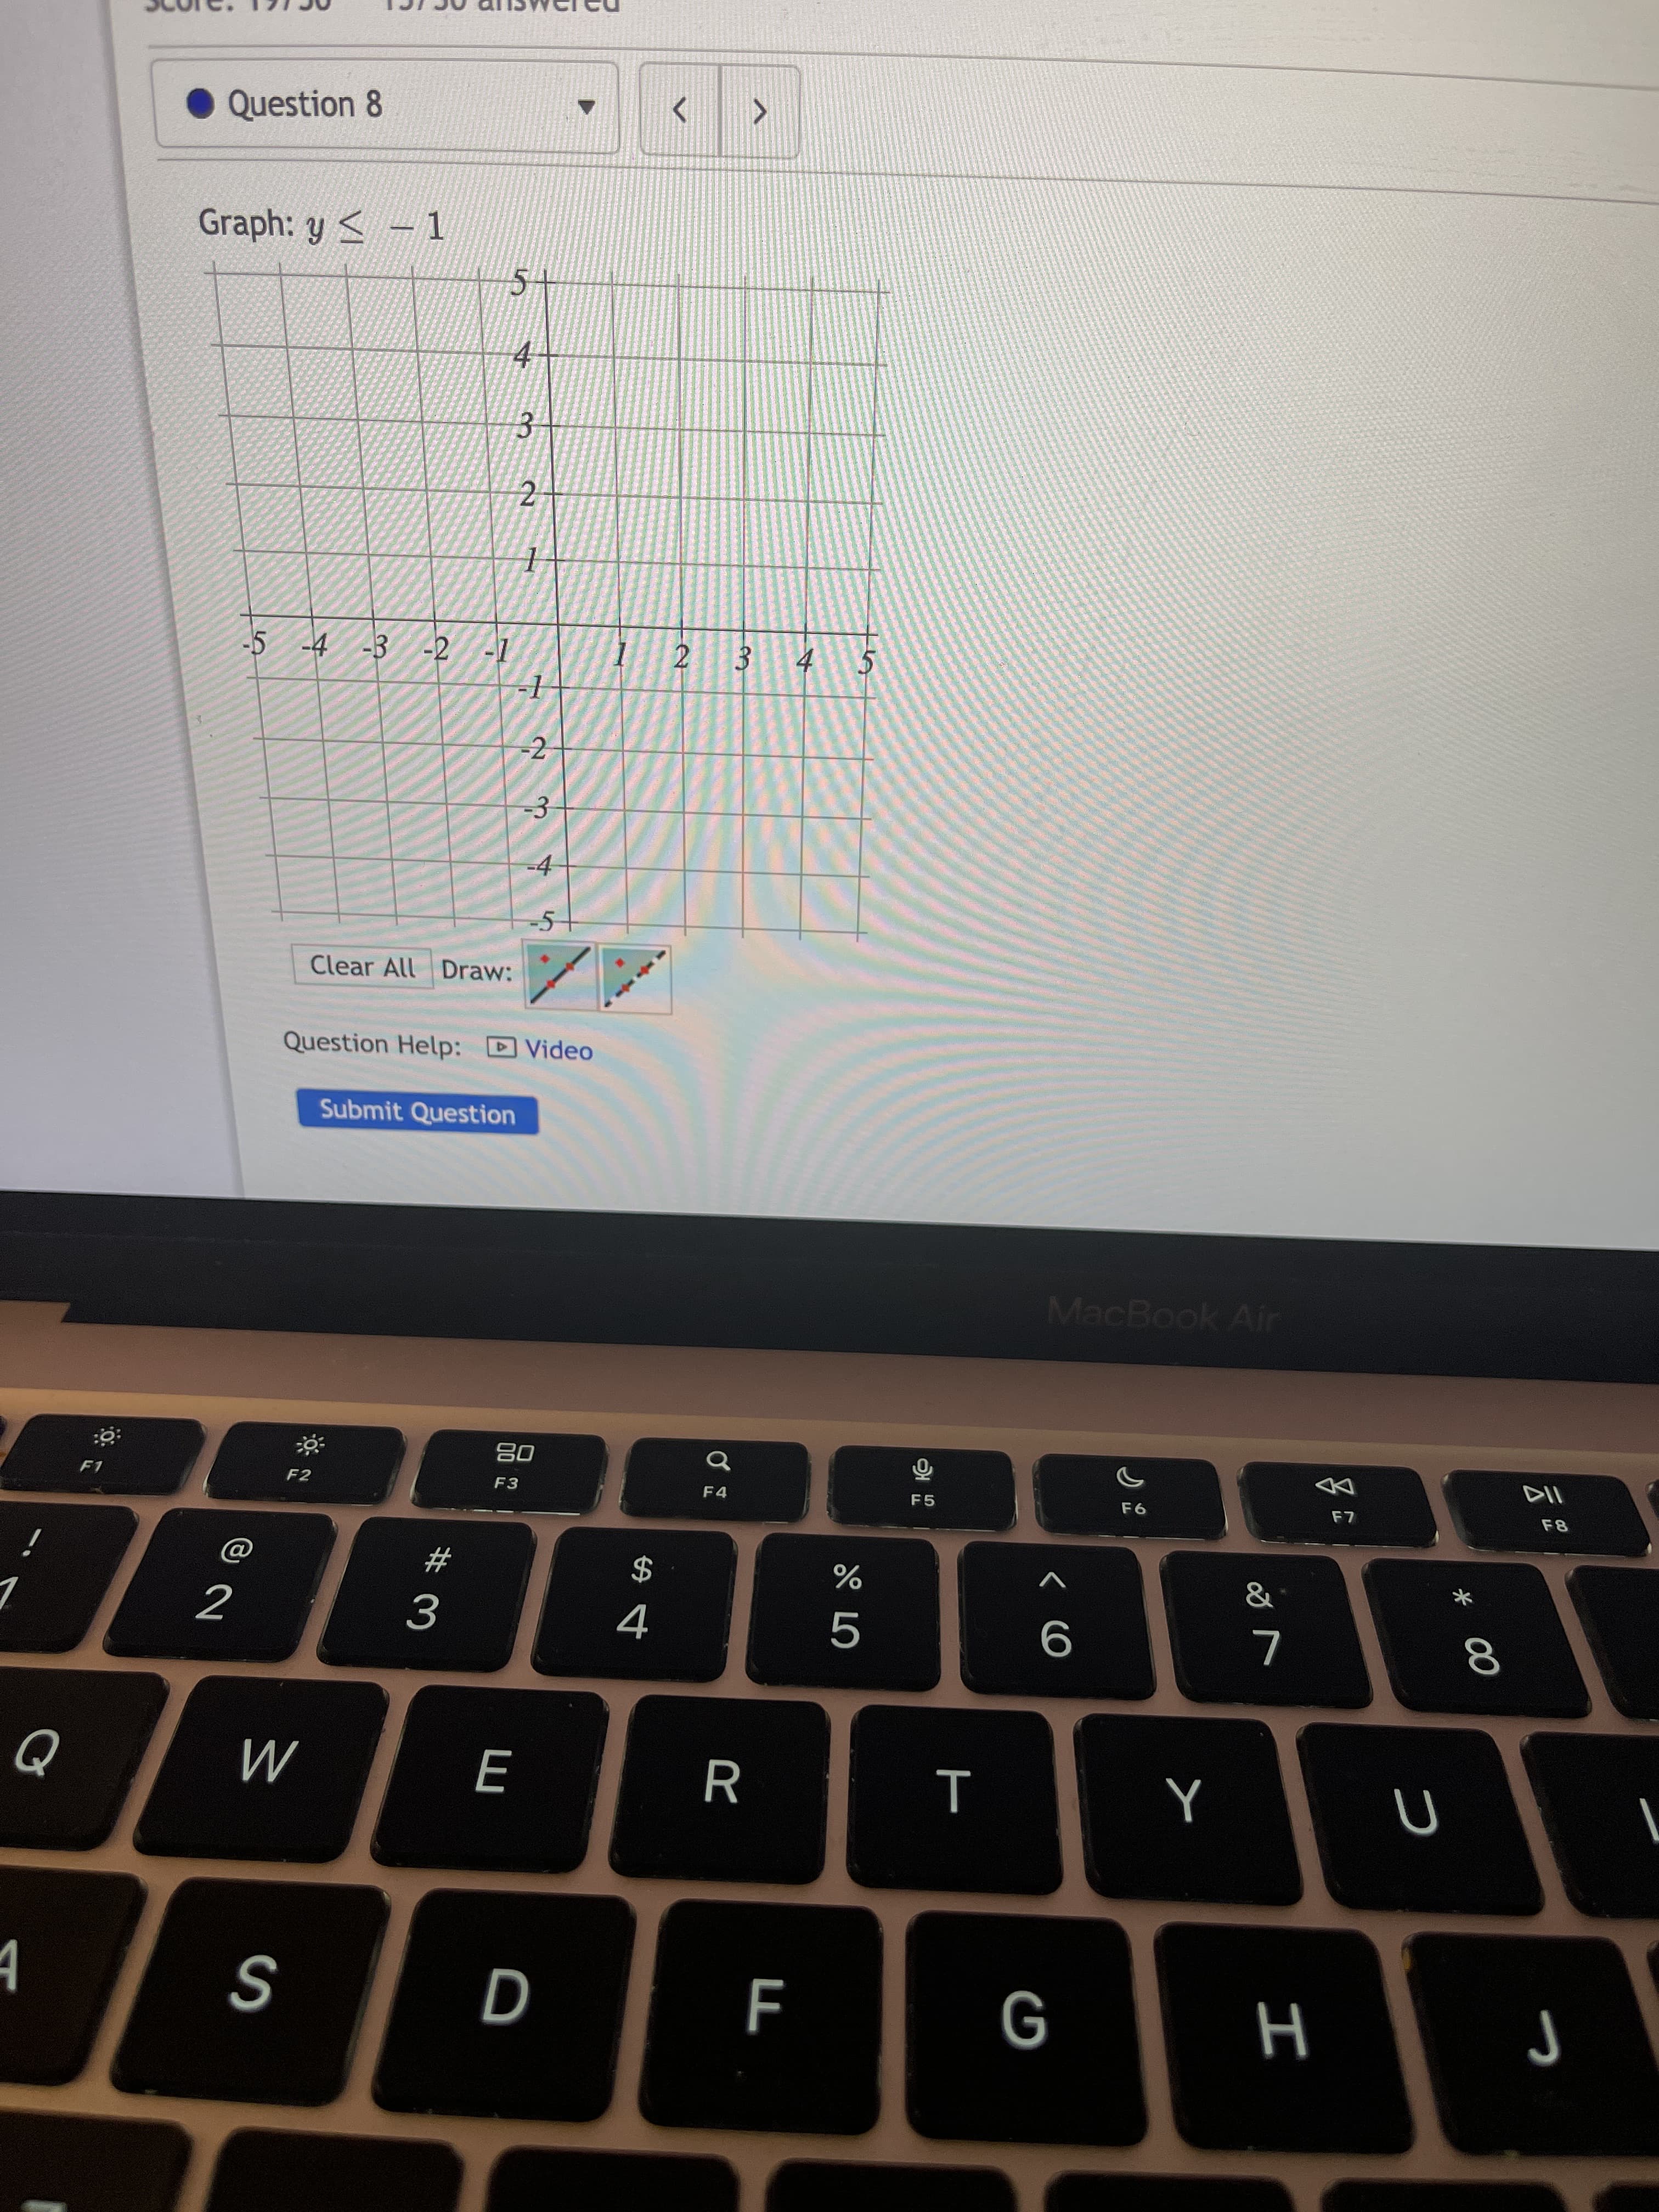 %24
3.
3.
2.
Question 8
Graph: y < – 1
4.
-5 -4 -3 -2
2.
2
Clear All Draw:
Question Help: D Video
Submit Question
MacBook Air
08
F3
F1
F2
F4
F5
F8
23
2$
2
R
H 9
